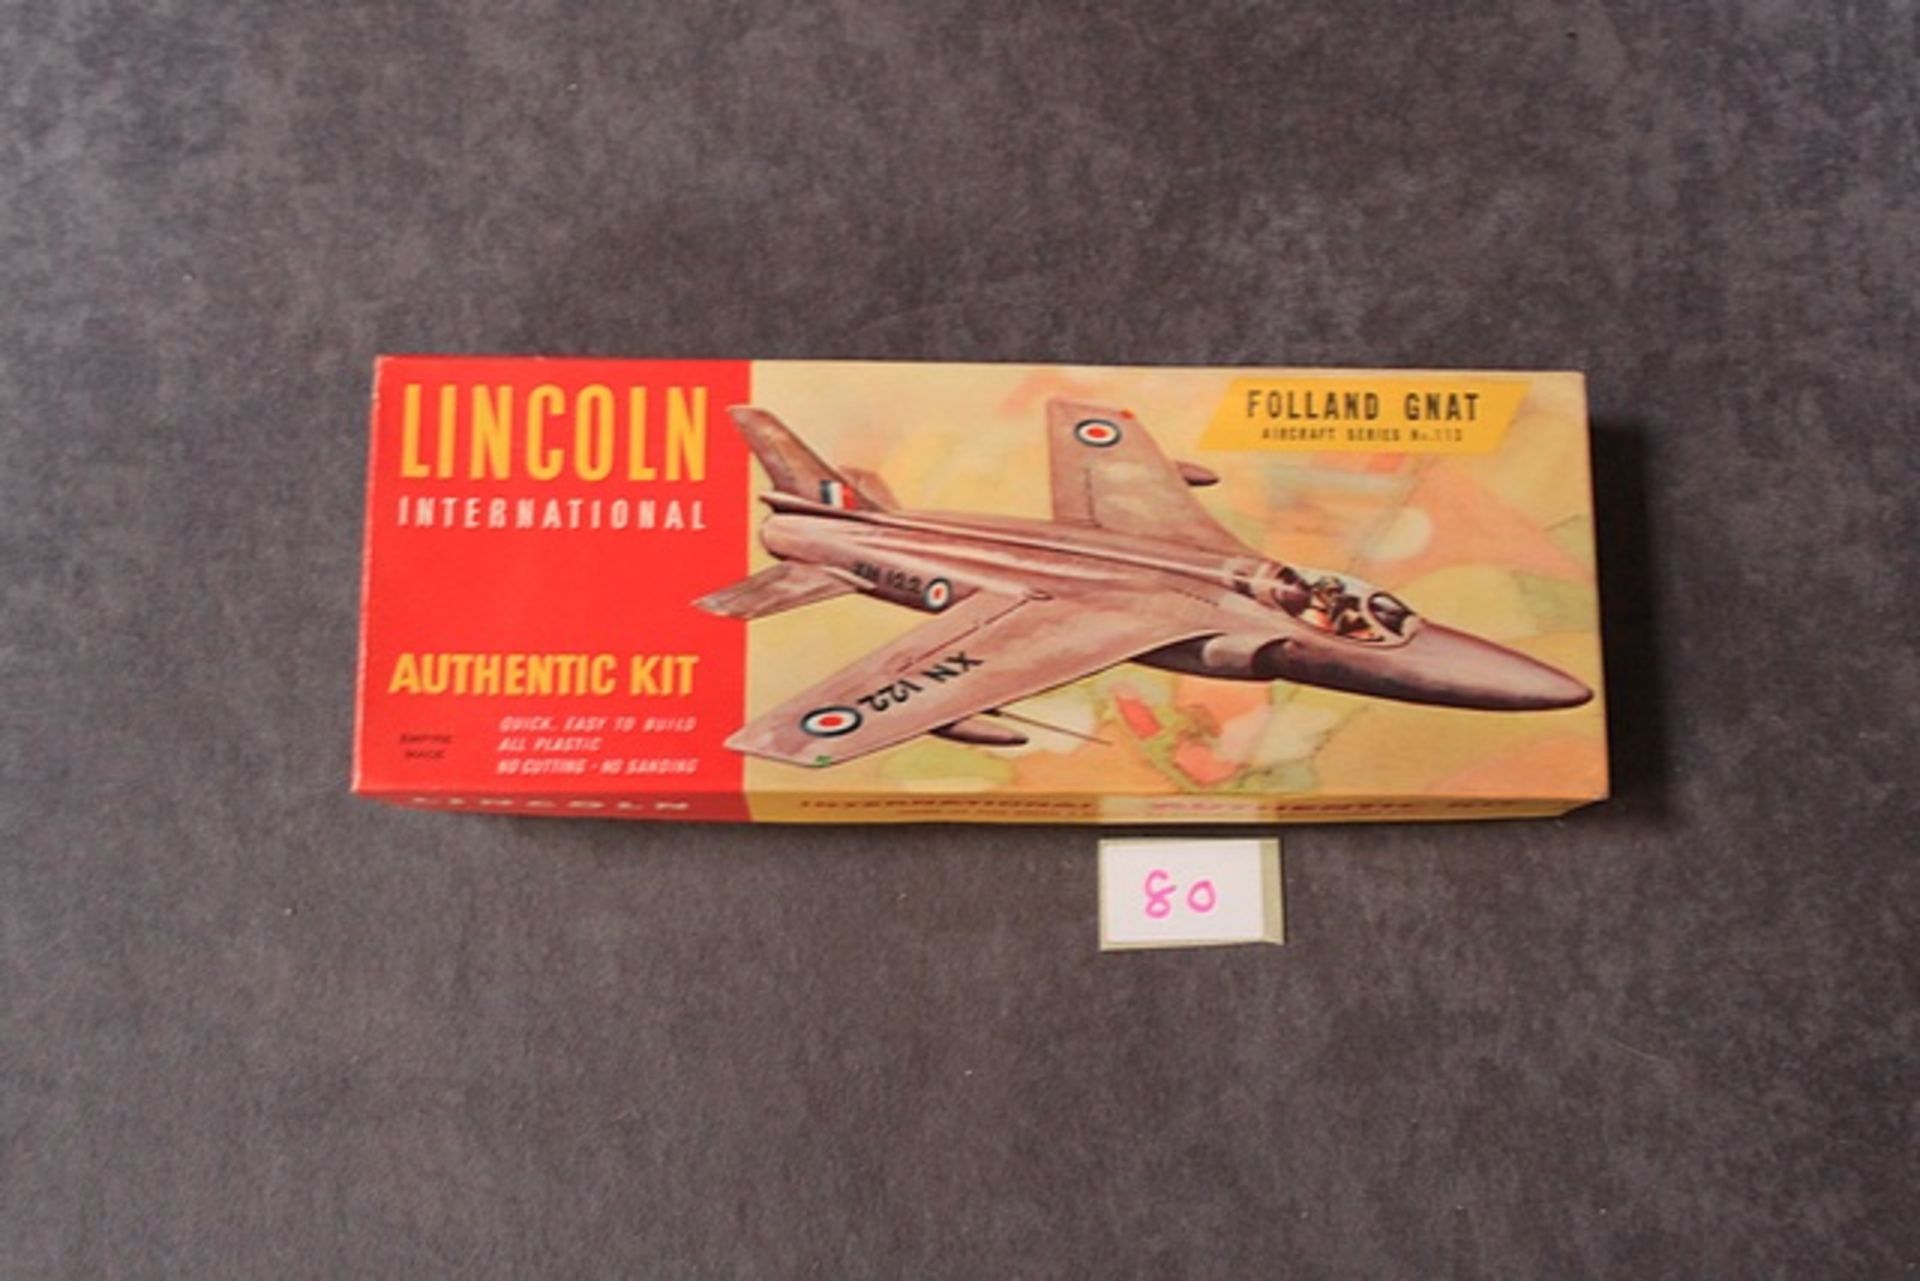 Lincoln International Authentic Kit No: 113 Folland Gnat Boxed - Image 2 of 2